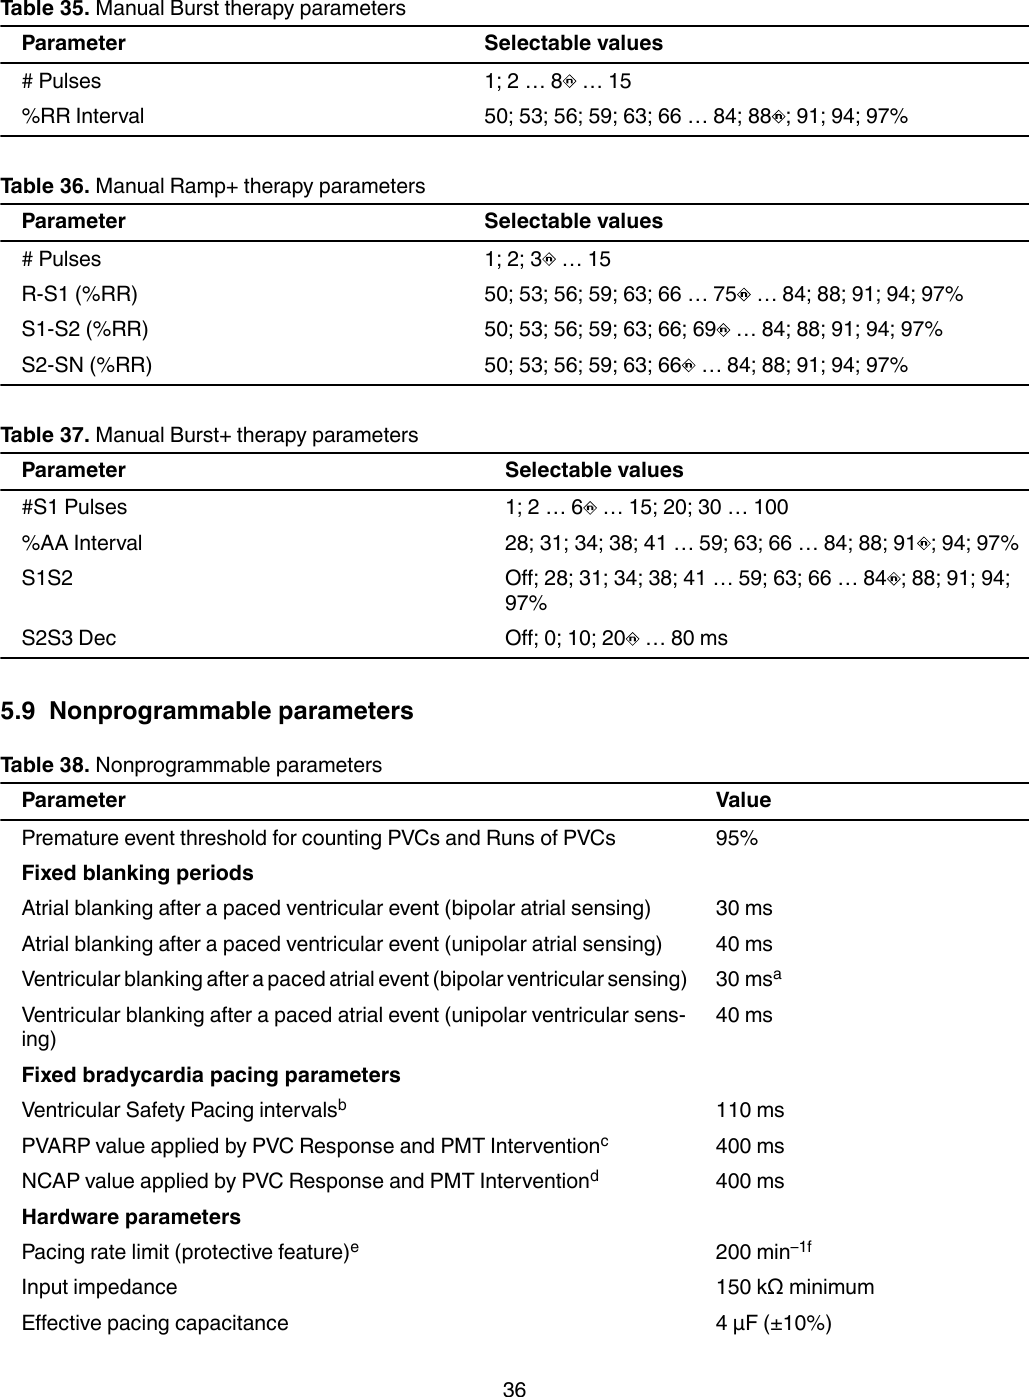 Table 35. Manual Burst therapy parametersParameter Selectable values# Pulses 1; 2 … 8  … 15%RR Interval 50; 53; 56; 59; 63; 66 … 84; 88 ; 91; 94; 97%Table 36. Manual Ramp+ therapy parametersParameter Selectable values# Pulses 1; 2; 3  … 15R-S1 (%RR) 50; 53; 56; 59; 63; 66 … 75  … 84; 88; 91; 94; 97%S1-S2 (%RR) 50; 53; 56; 59; 63; 66; 69  … 84; 88; 91; 94; 97%S2-SN (%RR) 50; 53; 56; 59; 63; 66  … 84; 88; 91; 94; 97%Table 37. Manual Burst+ therapy parametersParameter Selectable values#S1 Pulses 1; 2 … 6  … 15; 20; 30 … 100%AA Interval 28; 31; 34; 38; 41 … 59; 63; 66 … 84; 88; 91 ; 94; 97%S1S2 Off; 28; 31; 34; 38; 41 … 59; 63; 66 … 84 ; 88; 91; 94;97%S2S3 Dec Off; 0; 10; 20  … 80 ms5.9  Nonprogrammable parametersTable 38. Nonprogrammable parametersParameter ValuePremature event threshold for counting PVCs and Runs of PVCs 95%Fixed blanking periodsAtrial blanking after a paced ventricular event (bipolar atrial sensing) 30 msAtrial blanking after a paced ventricular event (unipolar atrial sensing) 40 msVentricular blanking after a paced atrial event (bipolar ventricular sensing) 30 msaVentricular blanking after a paced atrial event (unipolar ventricular sens-ing)40 msFixed bradycardia pacing parametersVentricular Safety Pacing intervalsb110 msPVARP value applied by PVC Response and PMT Interventionc400 msNCAP value applied by PVC Response and PMT Interventiond400 msHardware parametersPacing rate limit (protective feature)e200 min–1fInput impedance 150 kΩ minimumEffective pacing capacitance 4 µF (±10%)36